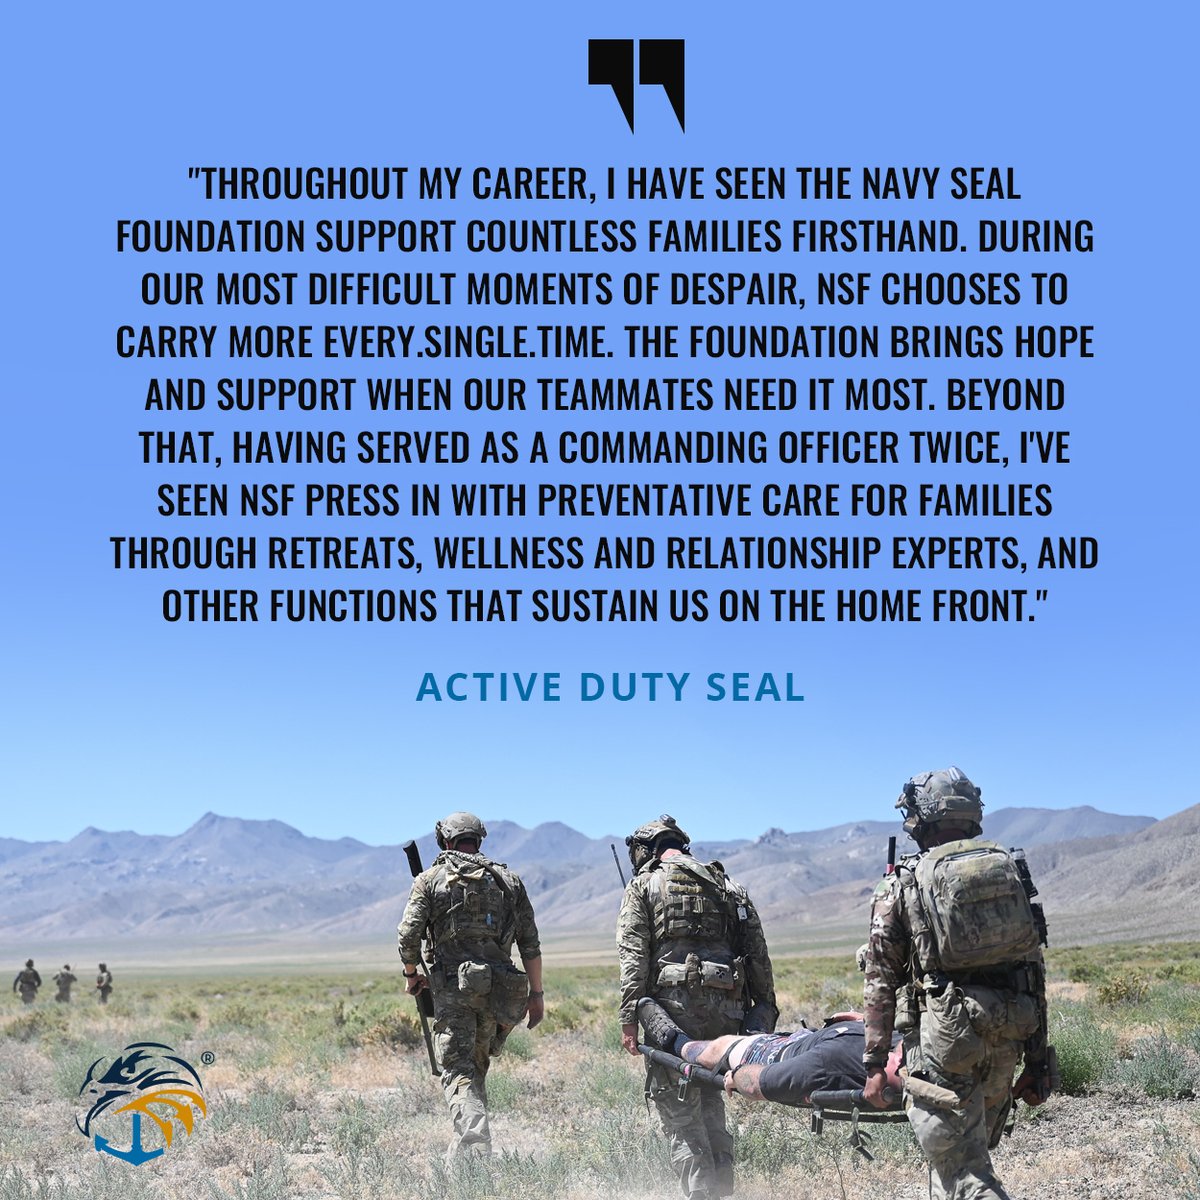 We are there to help keep our warriors in the fight. We are there to help them transition to successful careers in the civilian sector. We are there to help their families every step of the way. #NavySEALFoundation